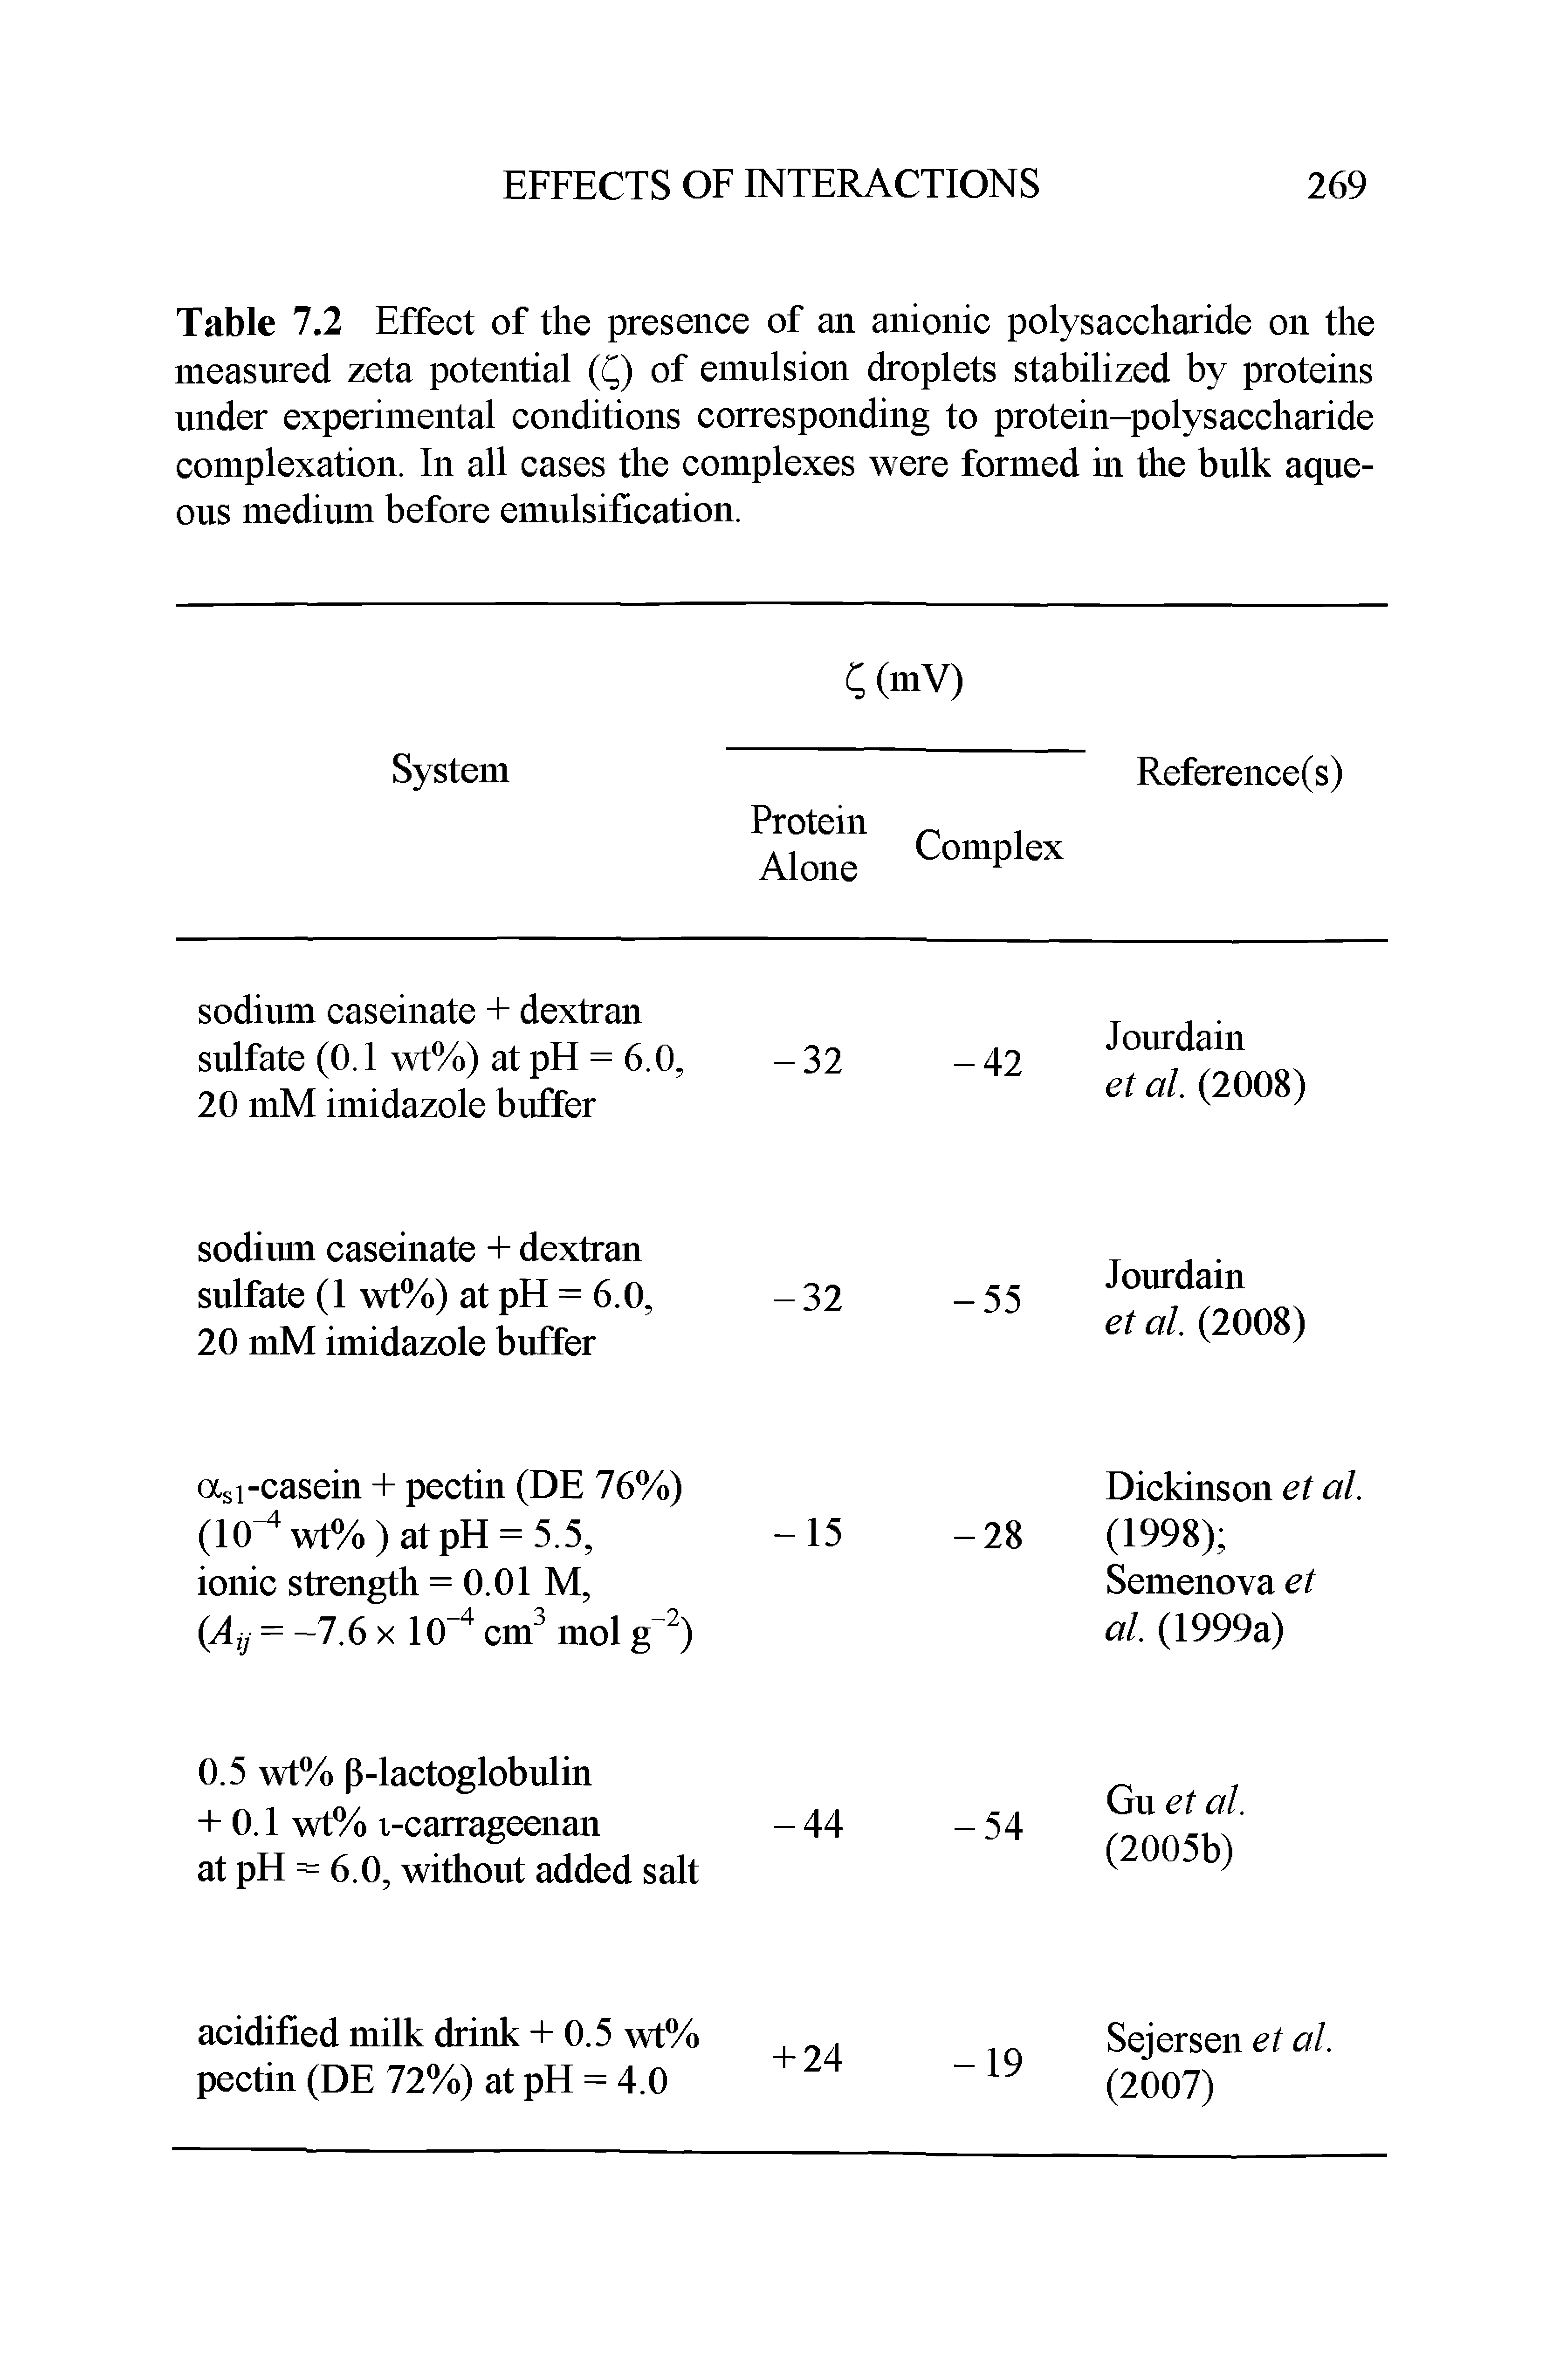 Table 7.2 Effect of the presence of an anionic polysaccharide on the measured zeta potential (Q of emulsion droplets stabilized by proteins under experimental conditions corresponding to protein-polysaccharide complexation. In all cases the complexes were formed in the bulk aqueous medium before emulsification.